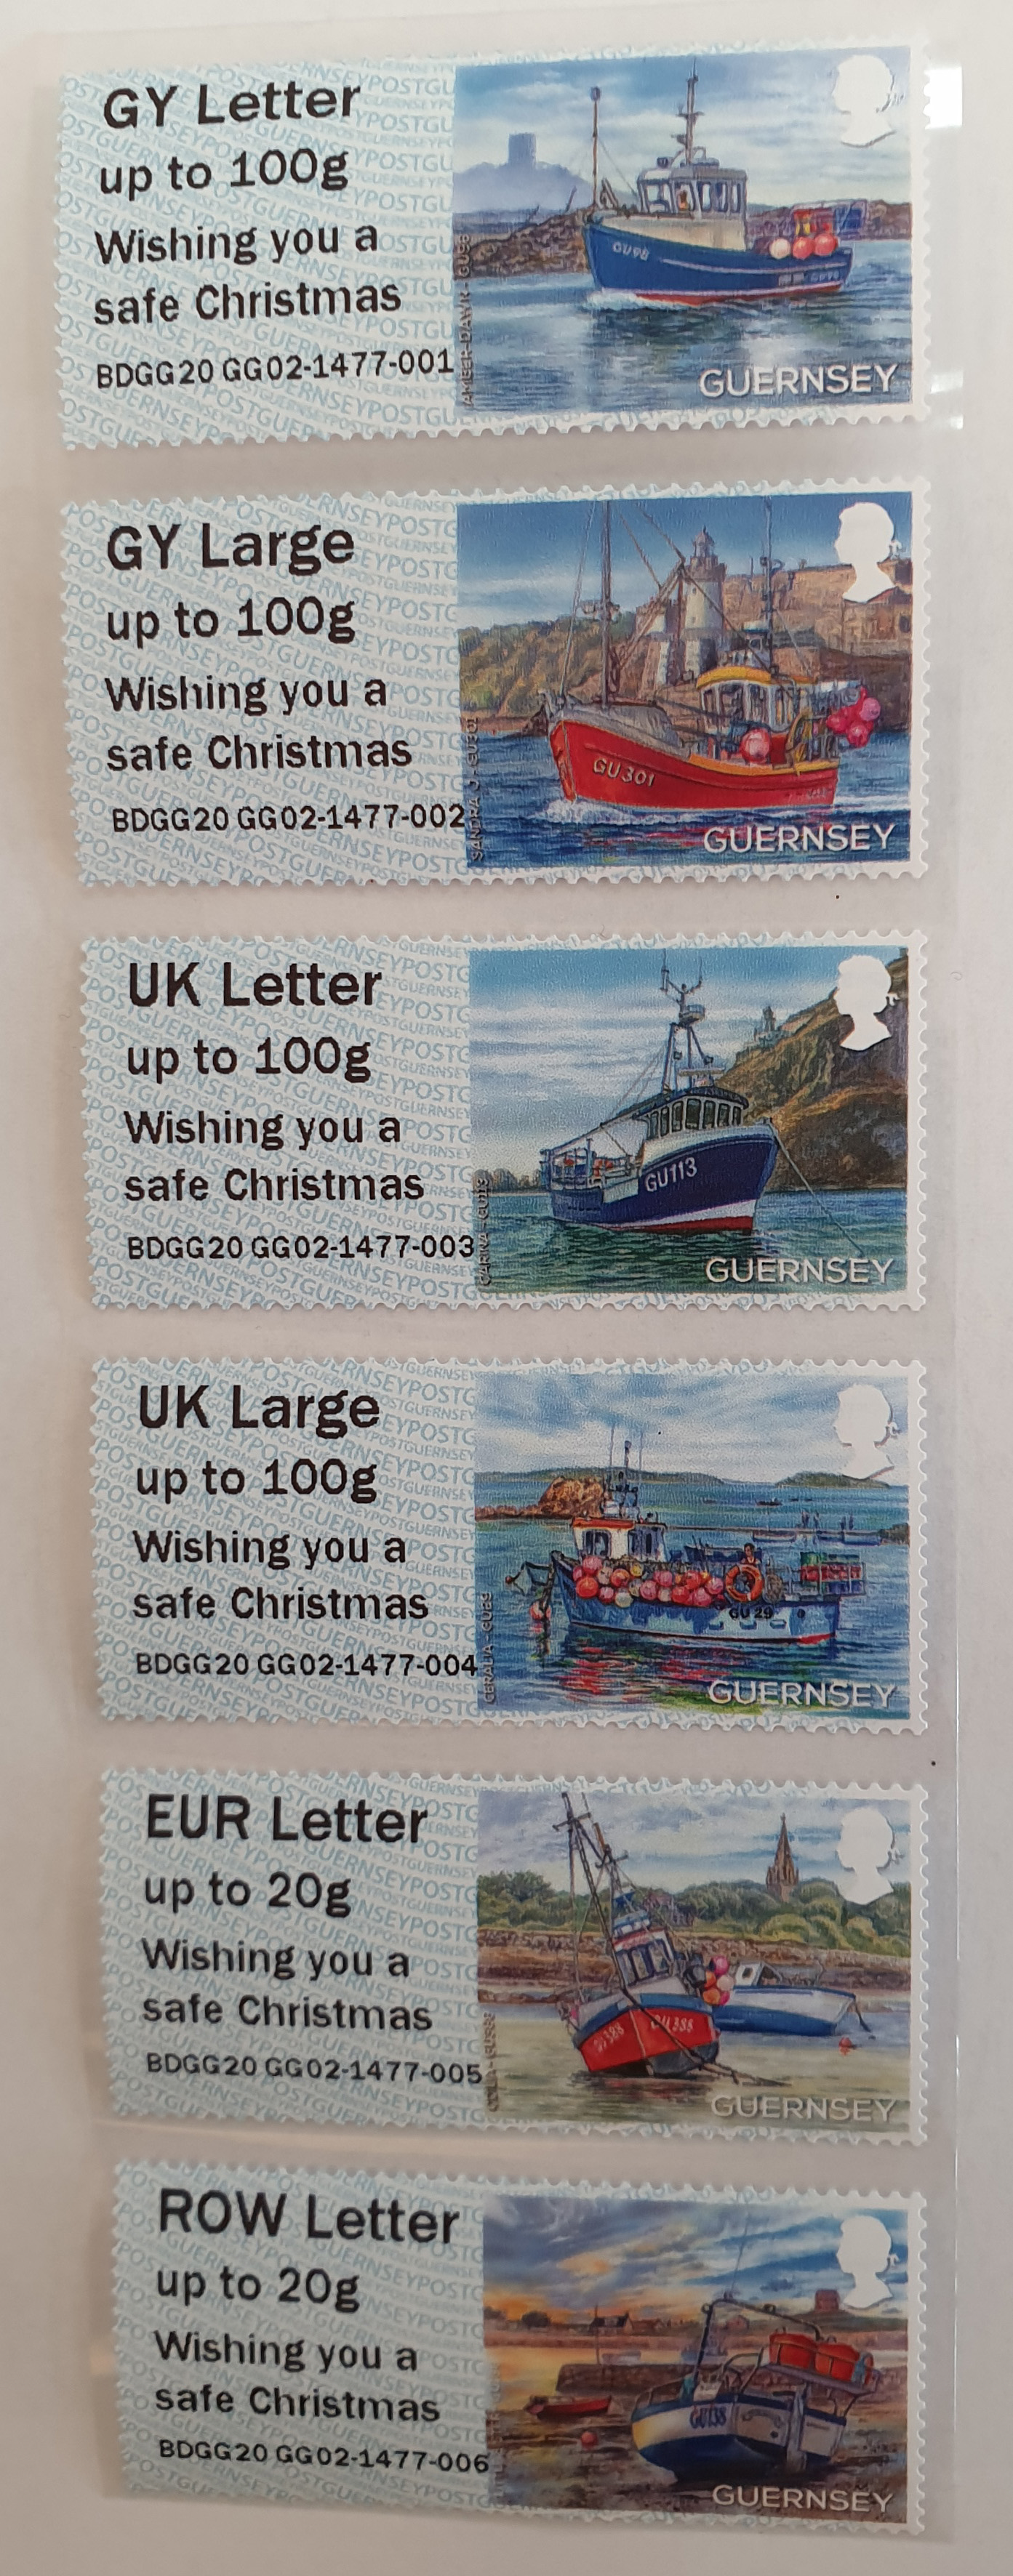 Guernsey Post & Go to send Christmas message